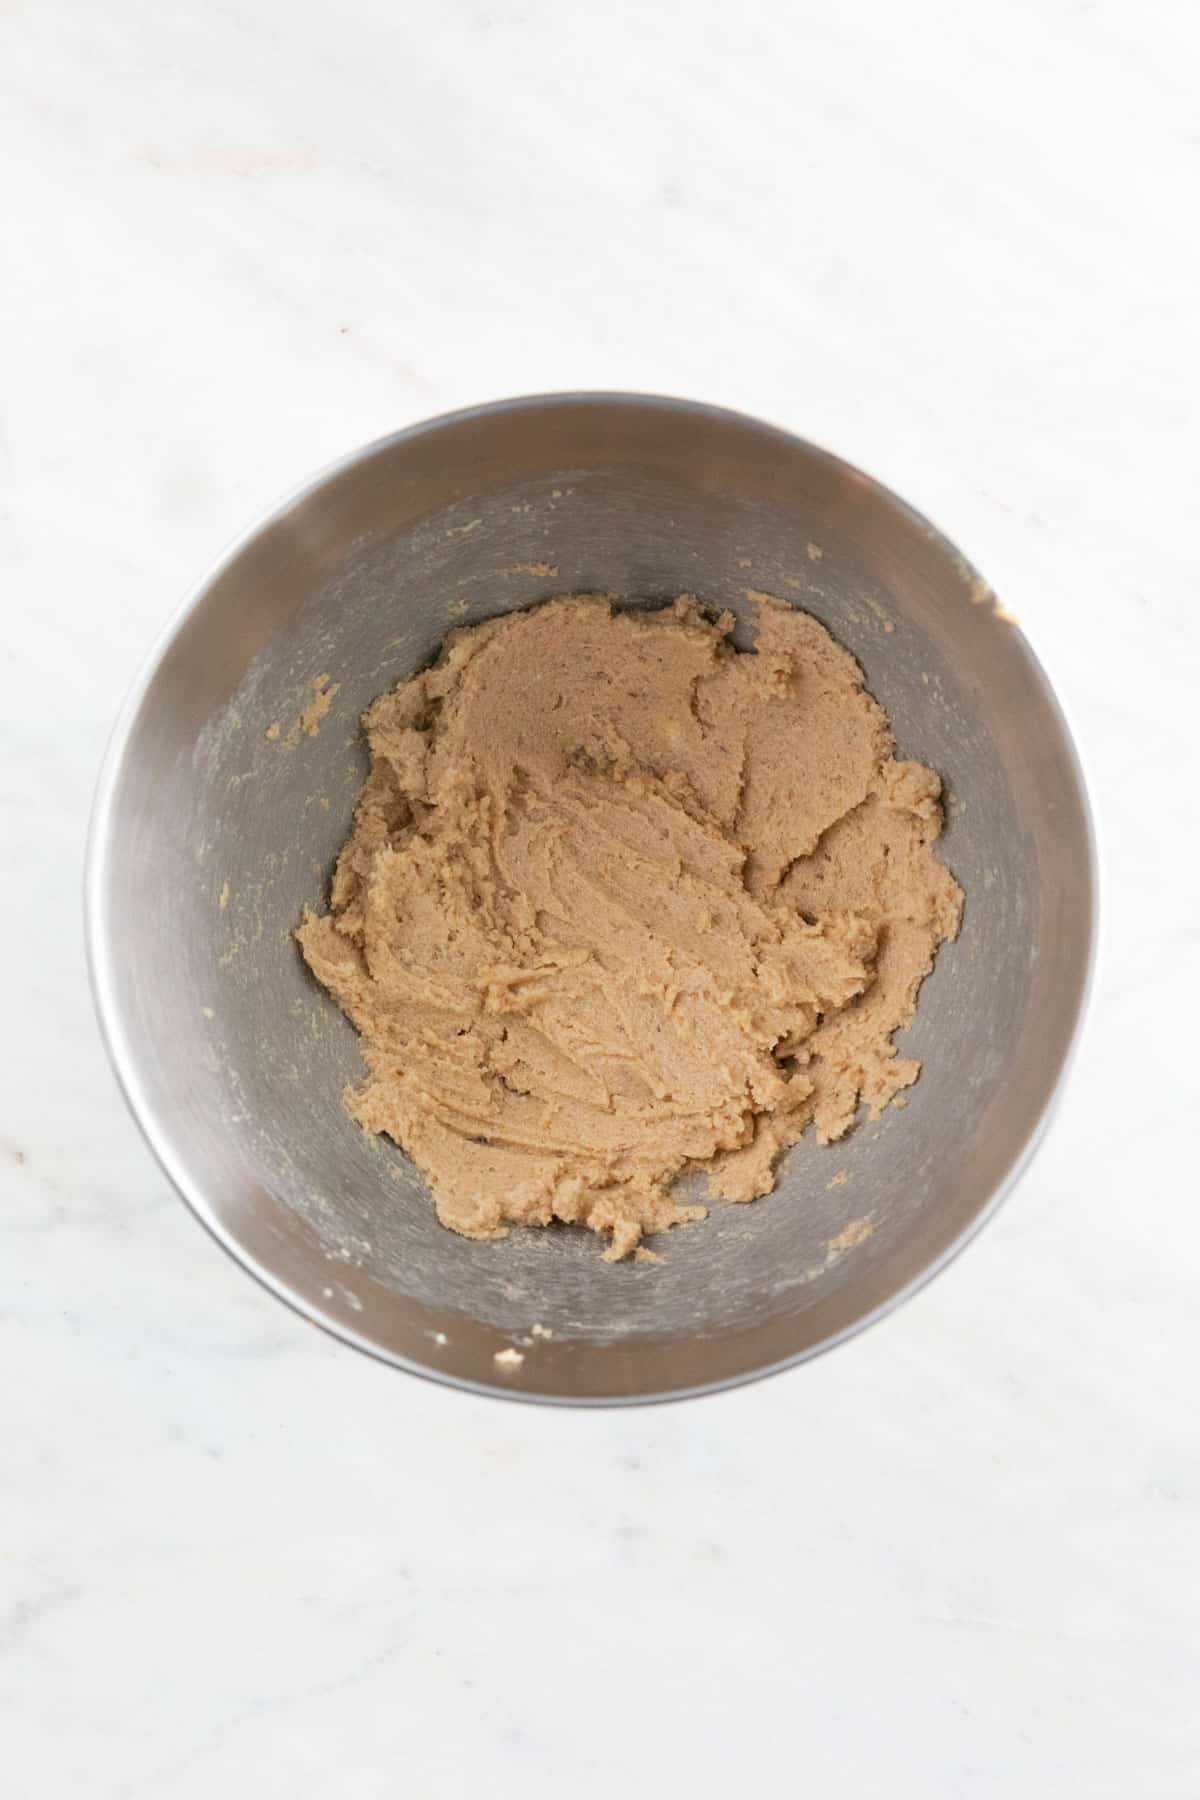 The vegan butter, granulated sugar, and brown sugar mixed in a large bowl.